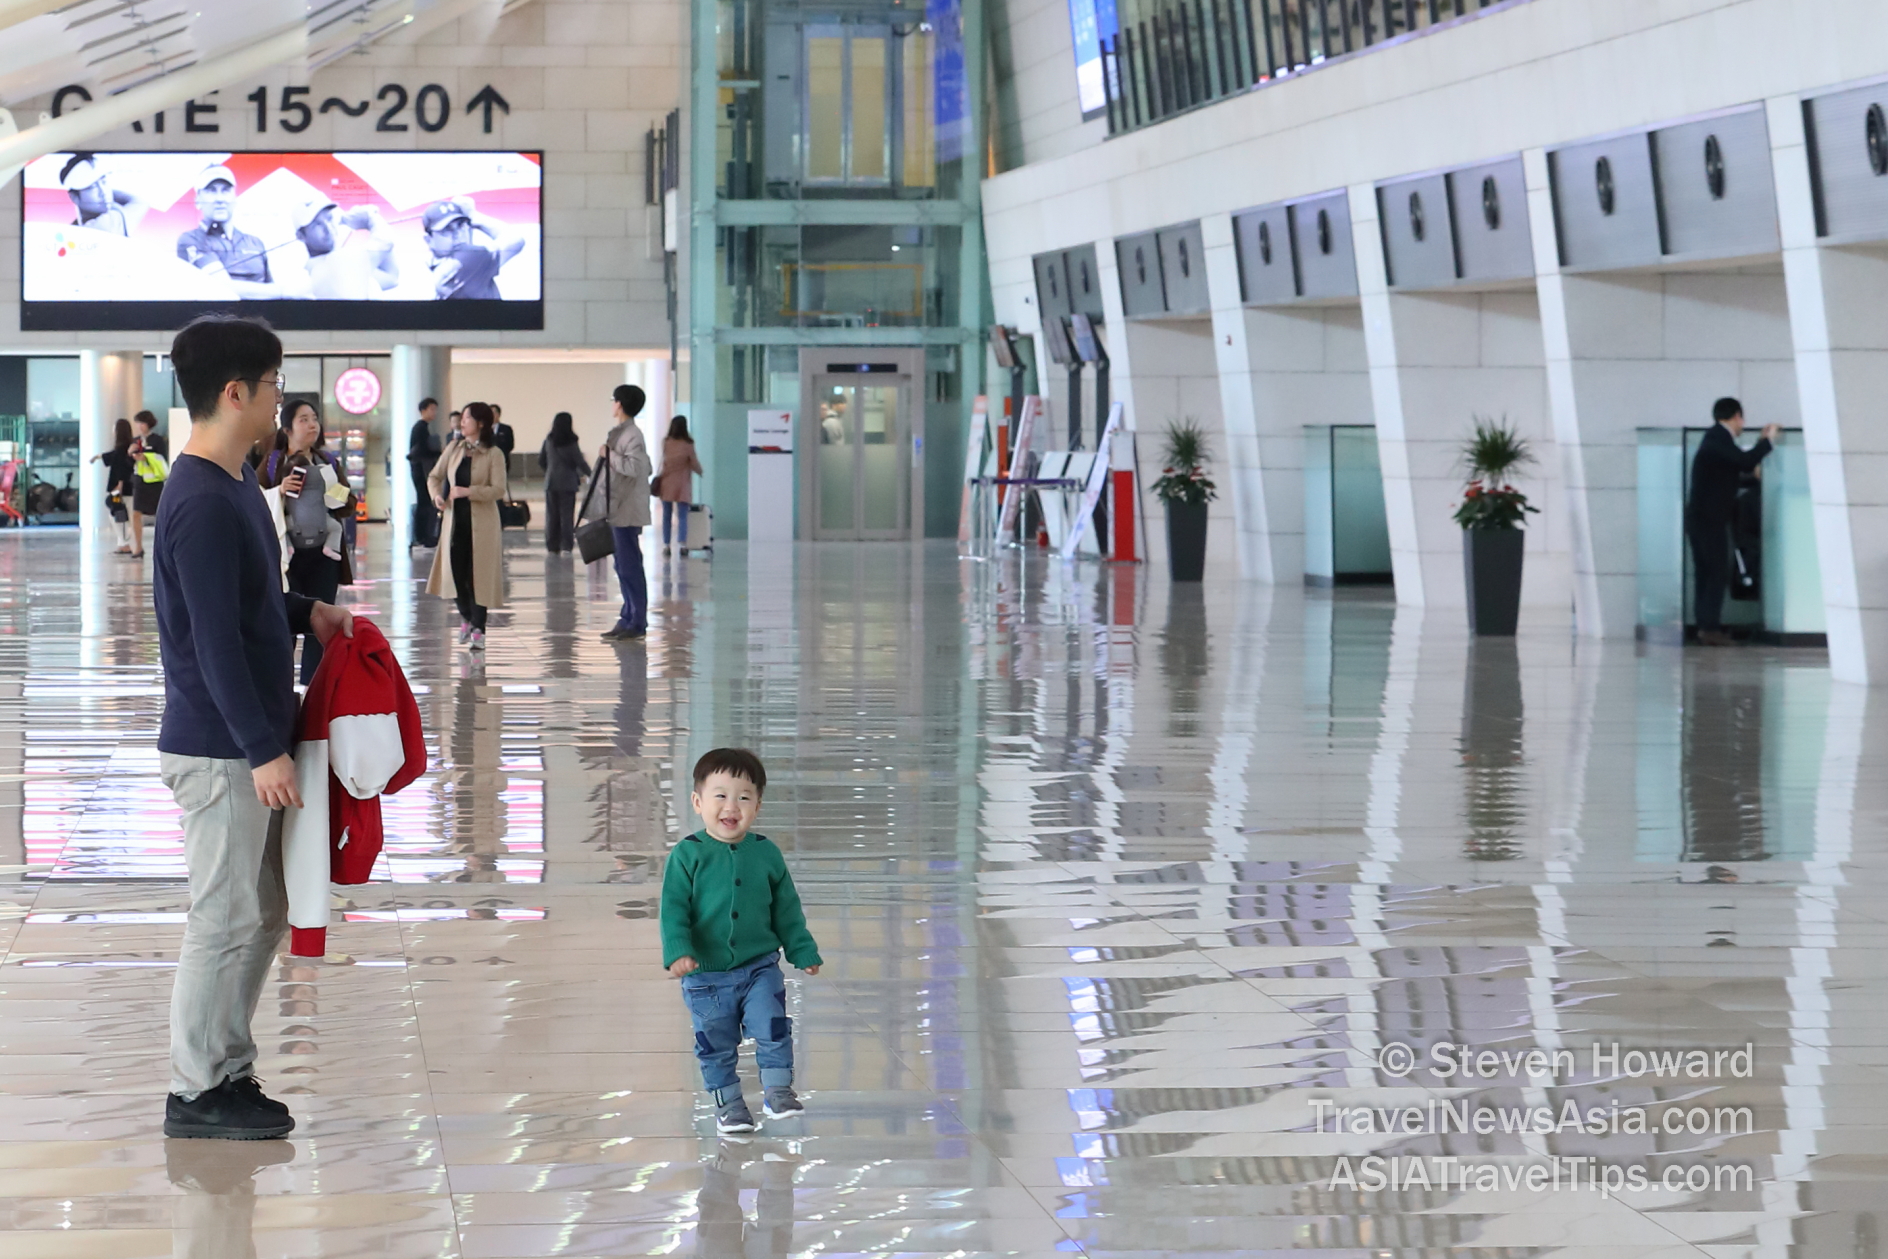 Gimpo Airport (GMP), South Korea. Picture by Steven Howard of TravelNewsAsia.com Click to enlarge.